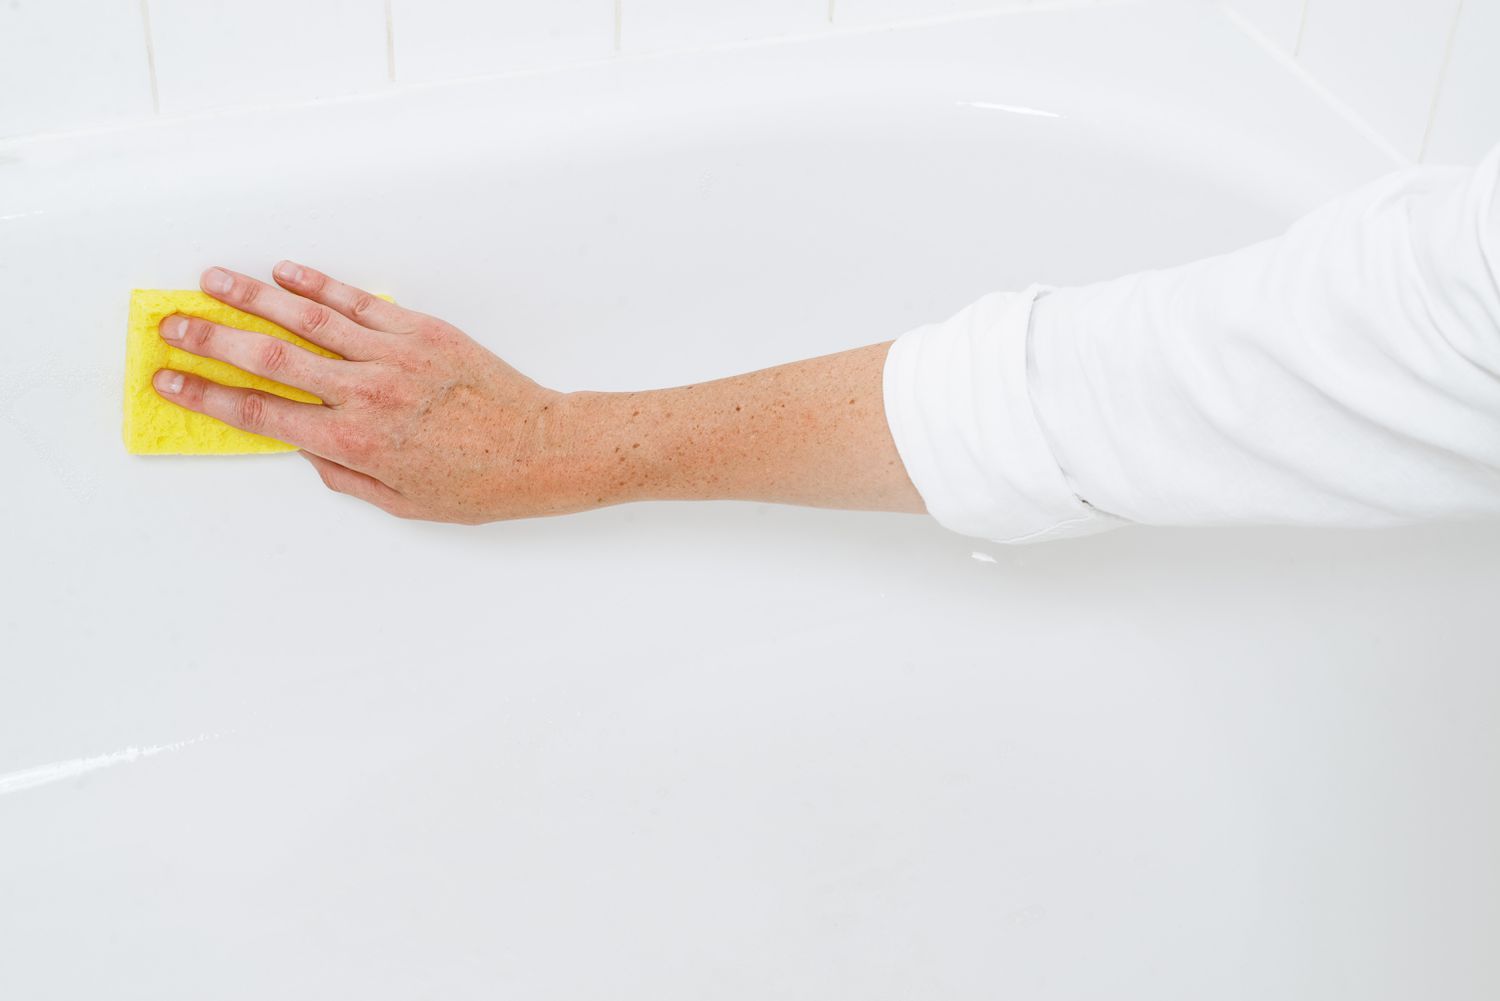 How To Strip A Painted Bathtub